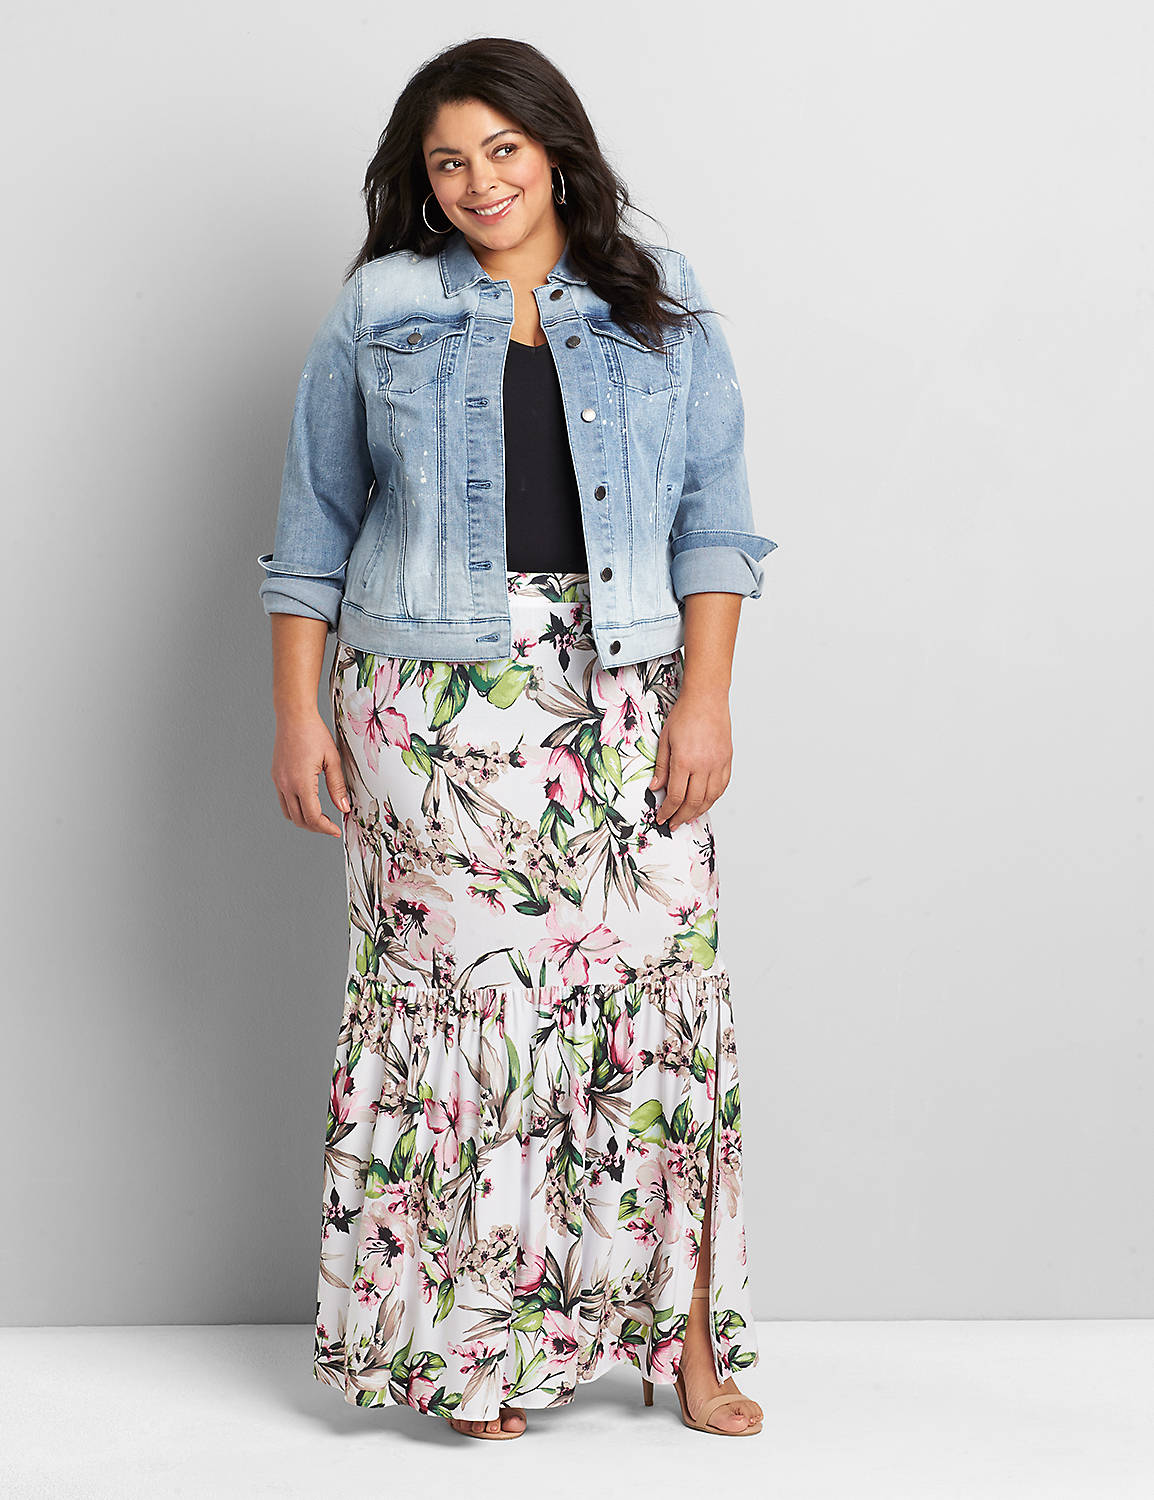 1119194 Pull-On Front Slit Midi Skirt 1119194:LBSP21182_OpenFloralTropical_C1:14/16 Product Image 1